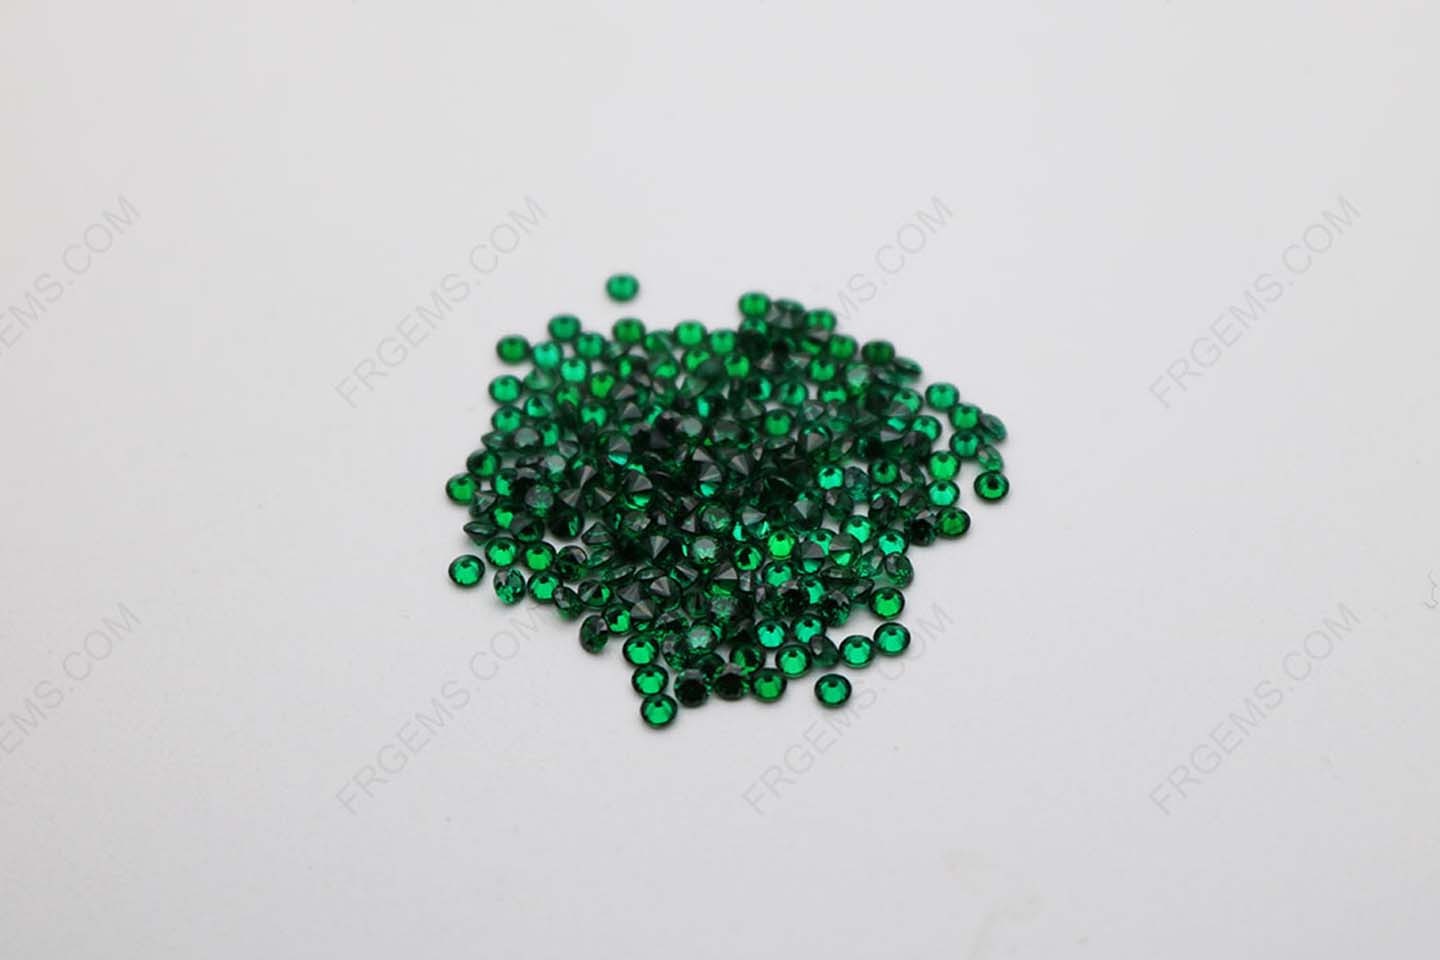 Cubic Zirconia Green Round diamond Faceted Cut 2.00mm Melee stones CZ35 IMG_1009